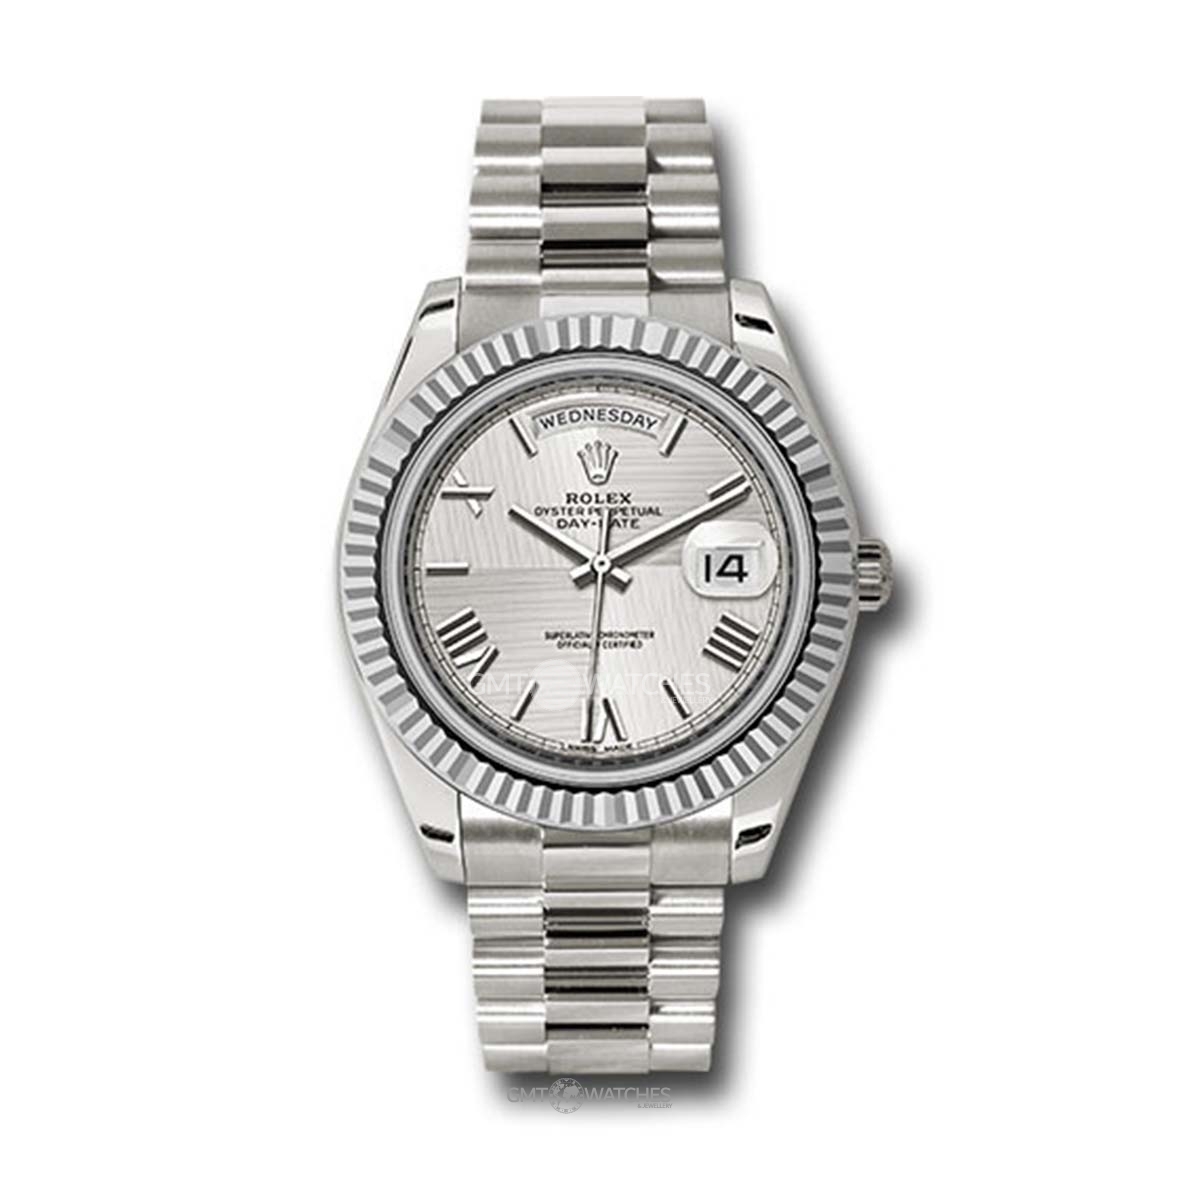 Rolex Oyster Perpetual Day-Date 40mm 18k White Gold 228239 sqmrp